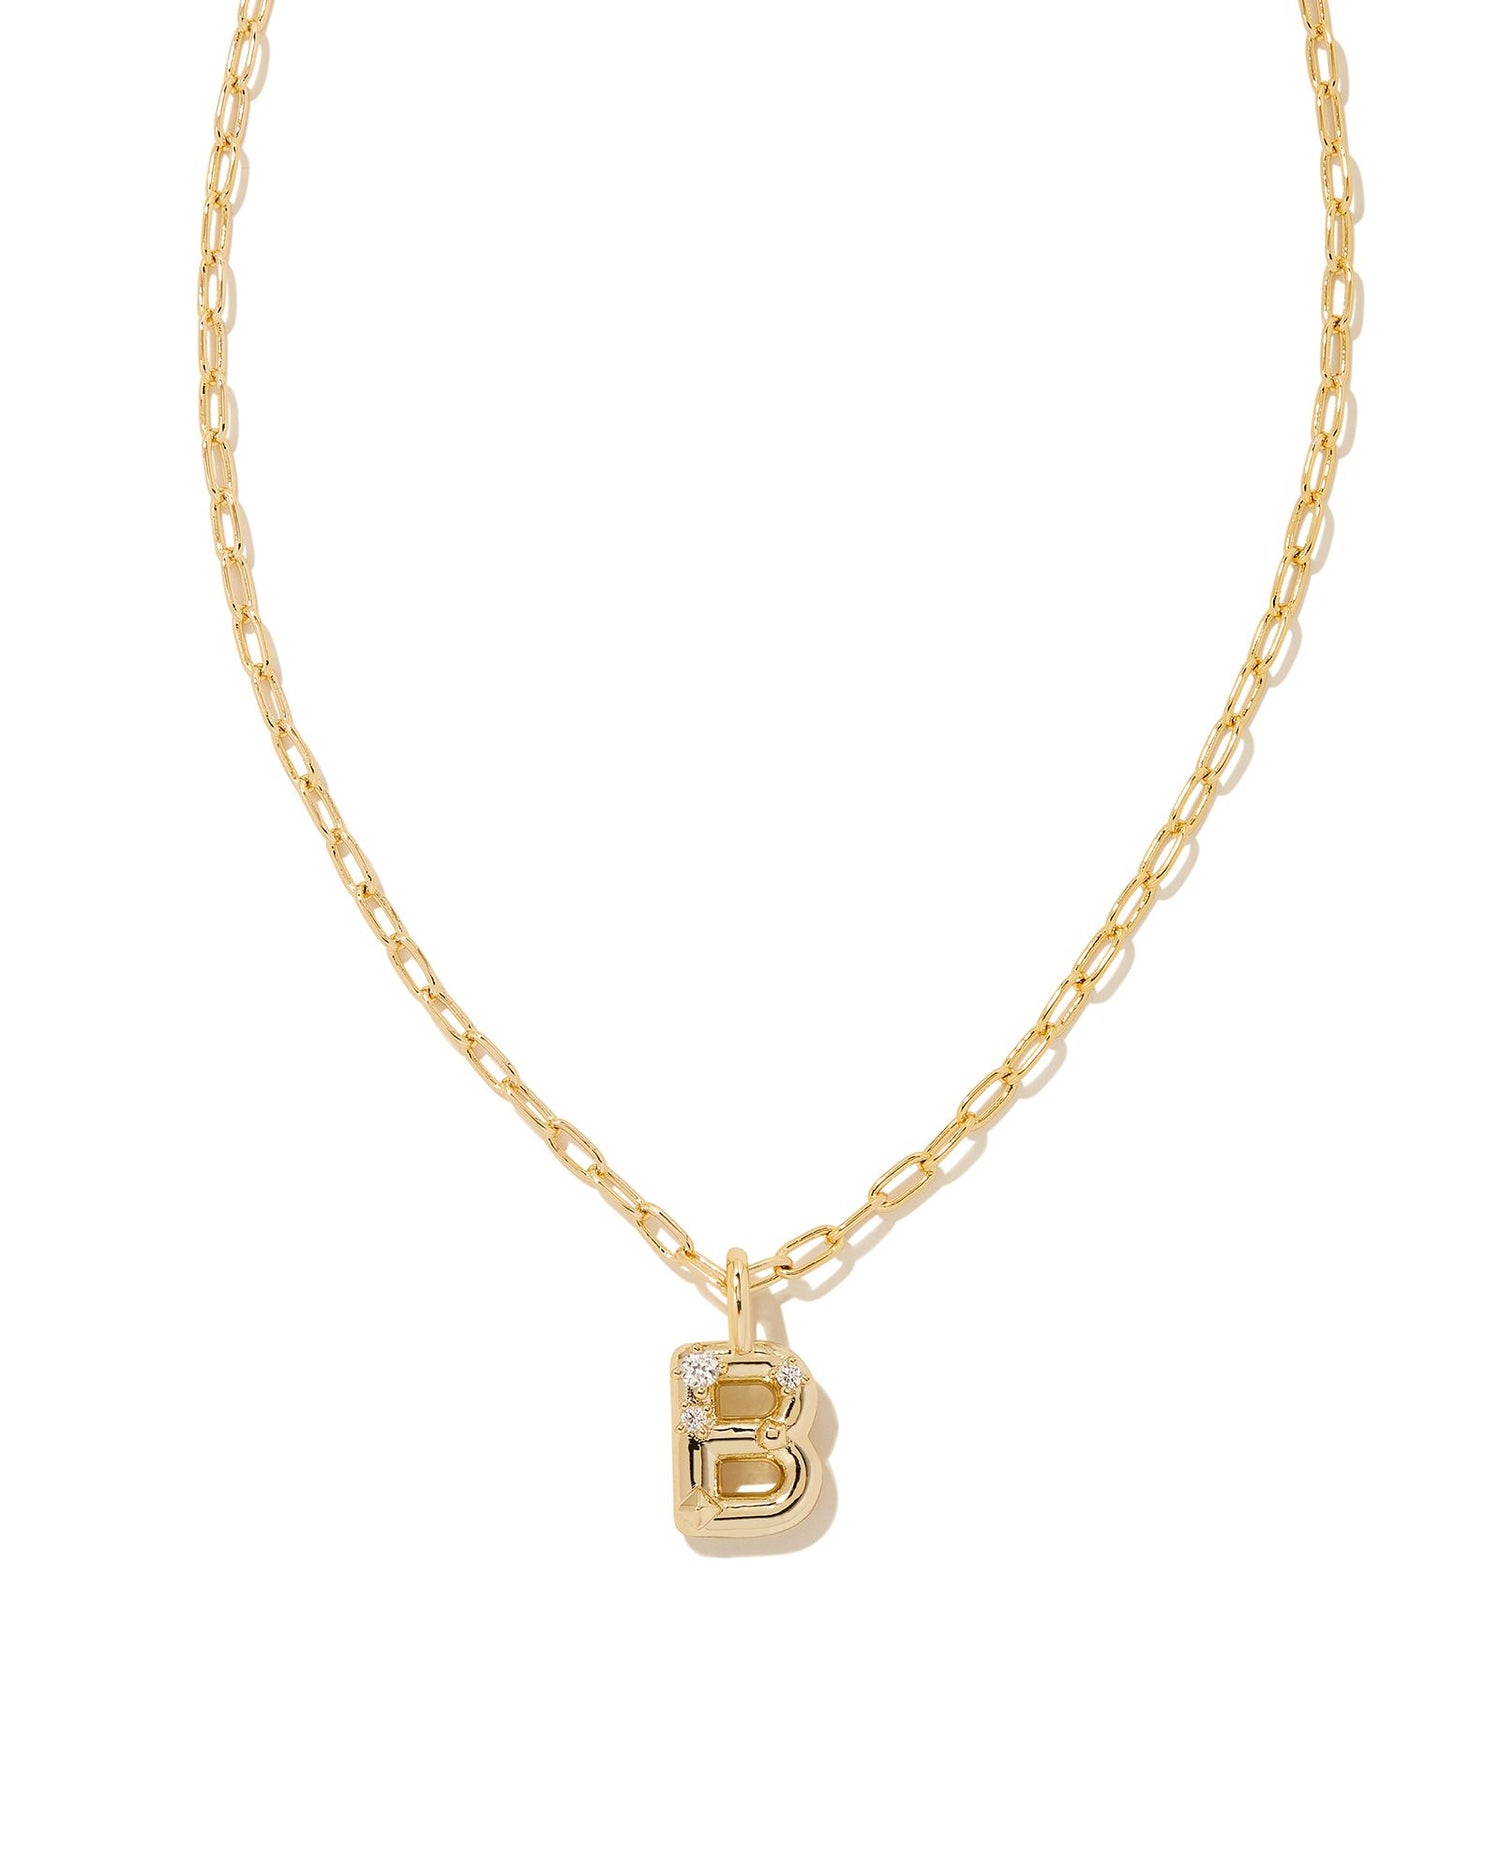 Personalize your everyday look with the Crystal Letter Short Pendant Necklace in White Crystal. Whether you’re rocking your initial or a loved one’s, this sentimental layer is one you’ll keep coming back to again and again.  Dimensions- 16' CHAIN WITH 3' EXTENDER, 0.62'L X 0.35"W PENDANT Metal- 14K Gold plated over brass Closure- Lobster Clasp Material-   White CZ letter B